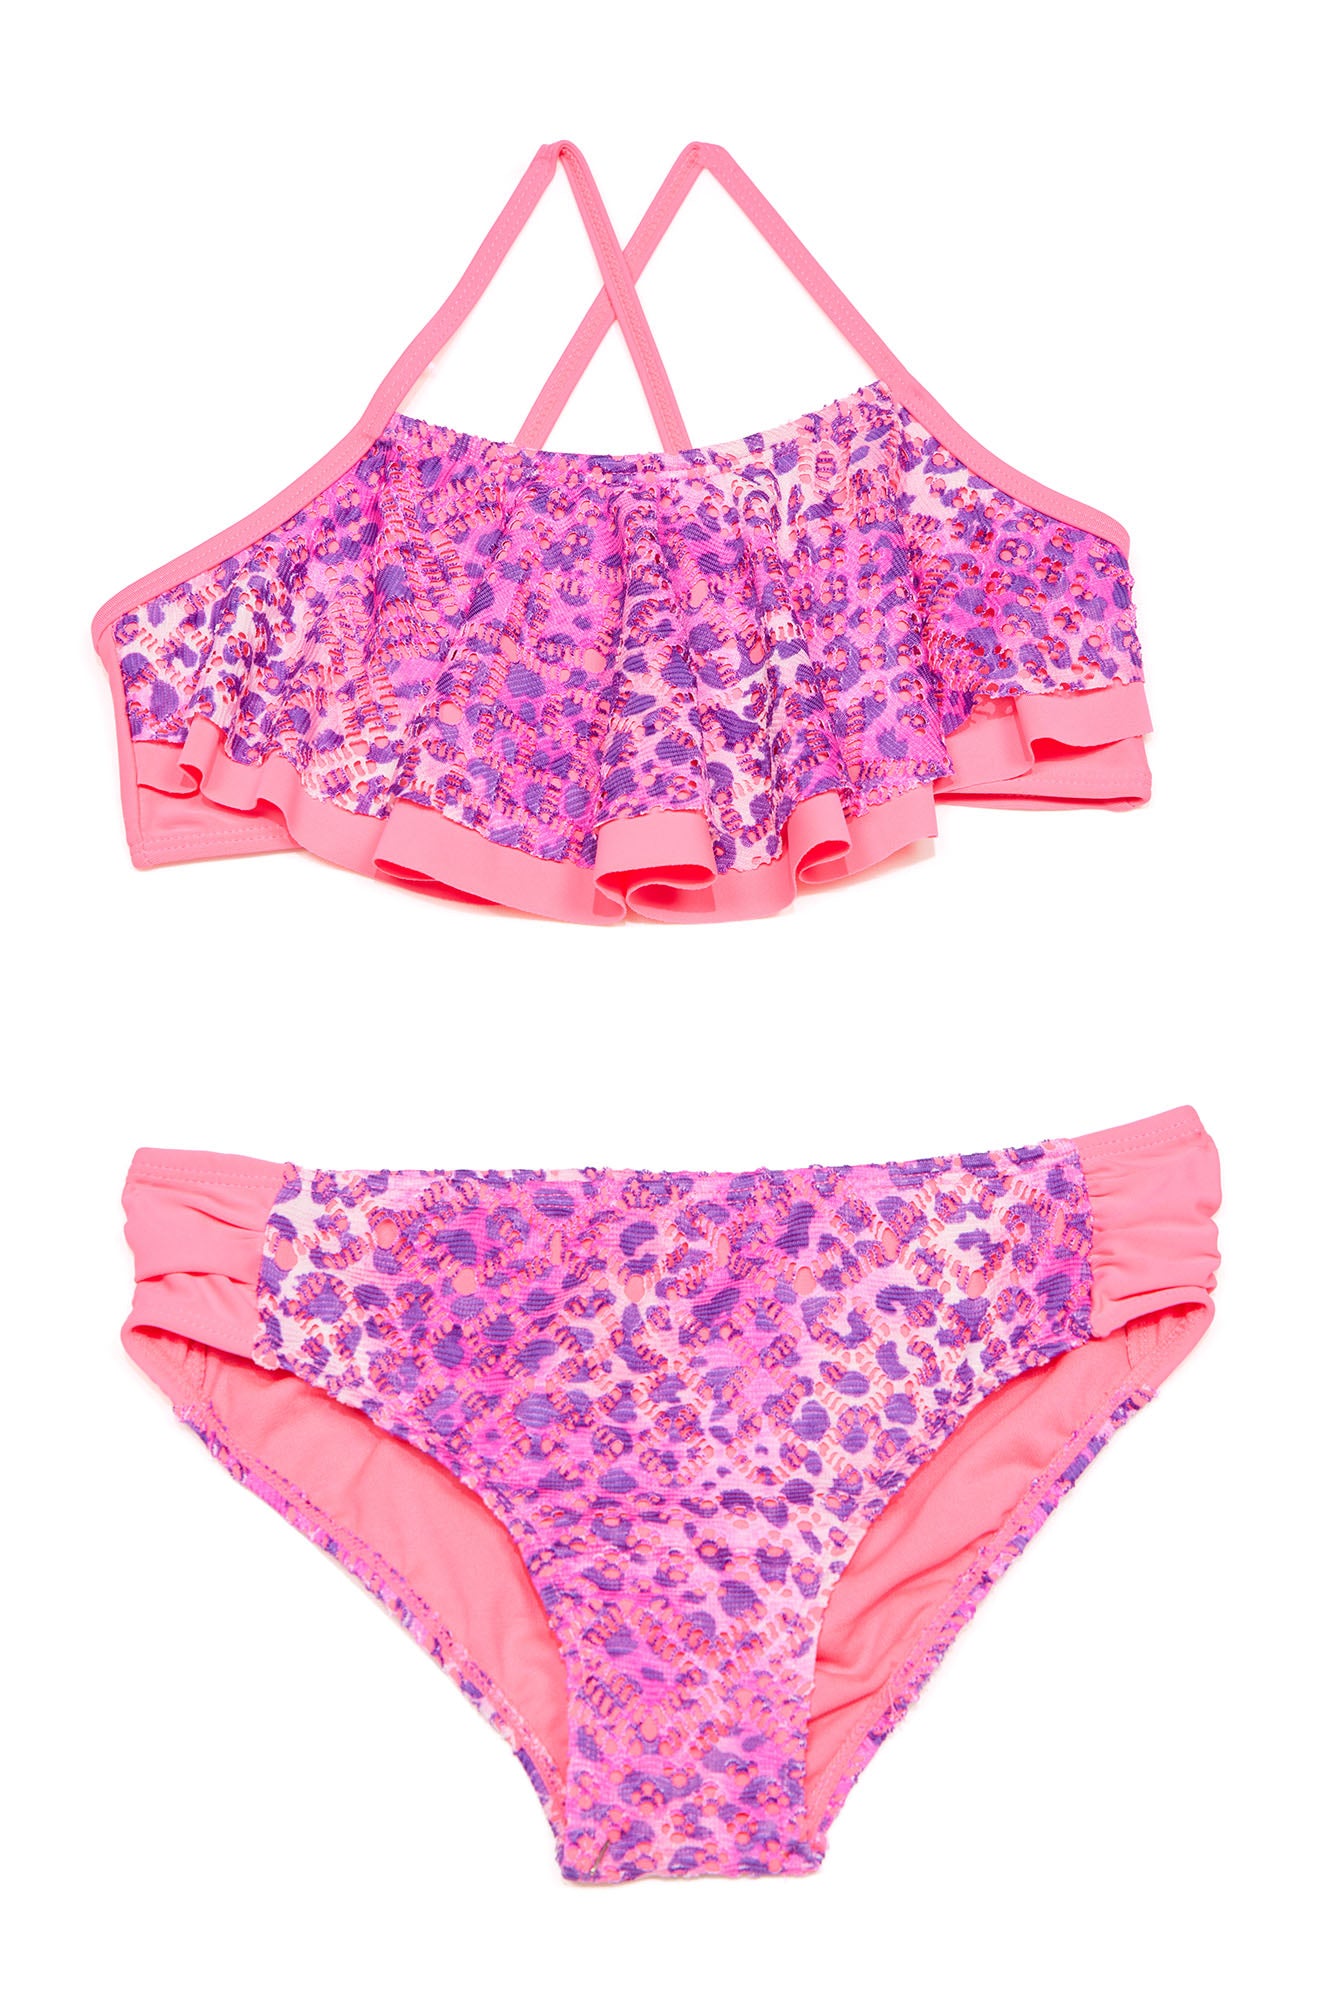 Cute Pink Swimsuits For Women & Teens Cheap Bathing Suit Flounce